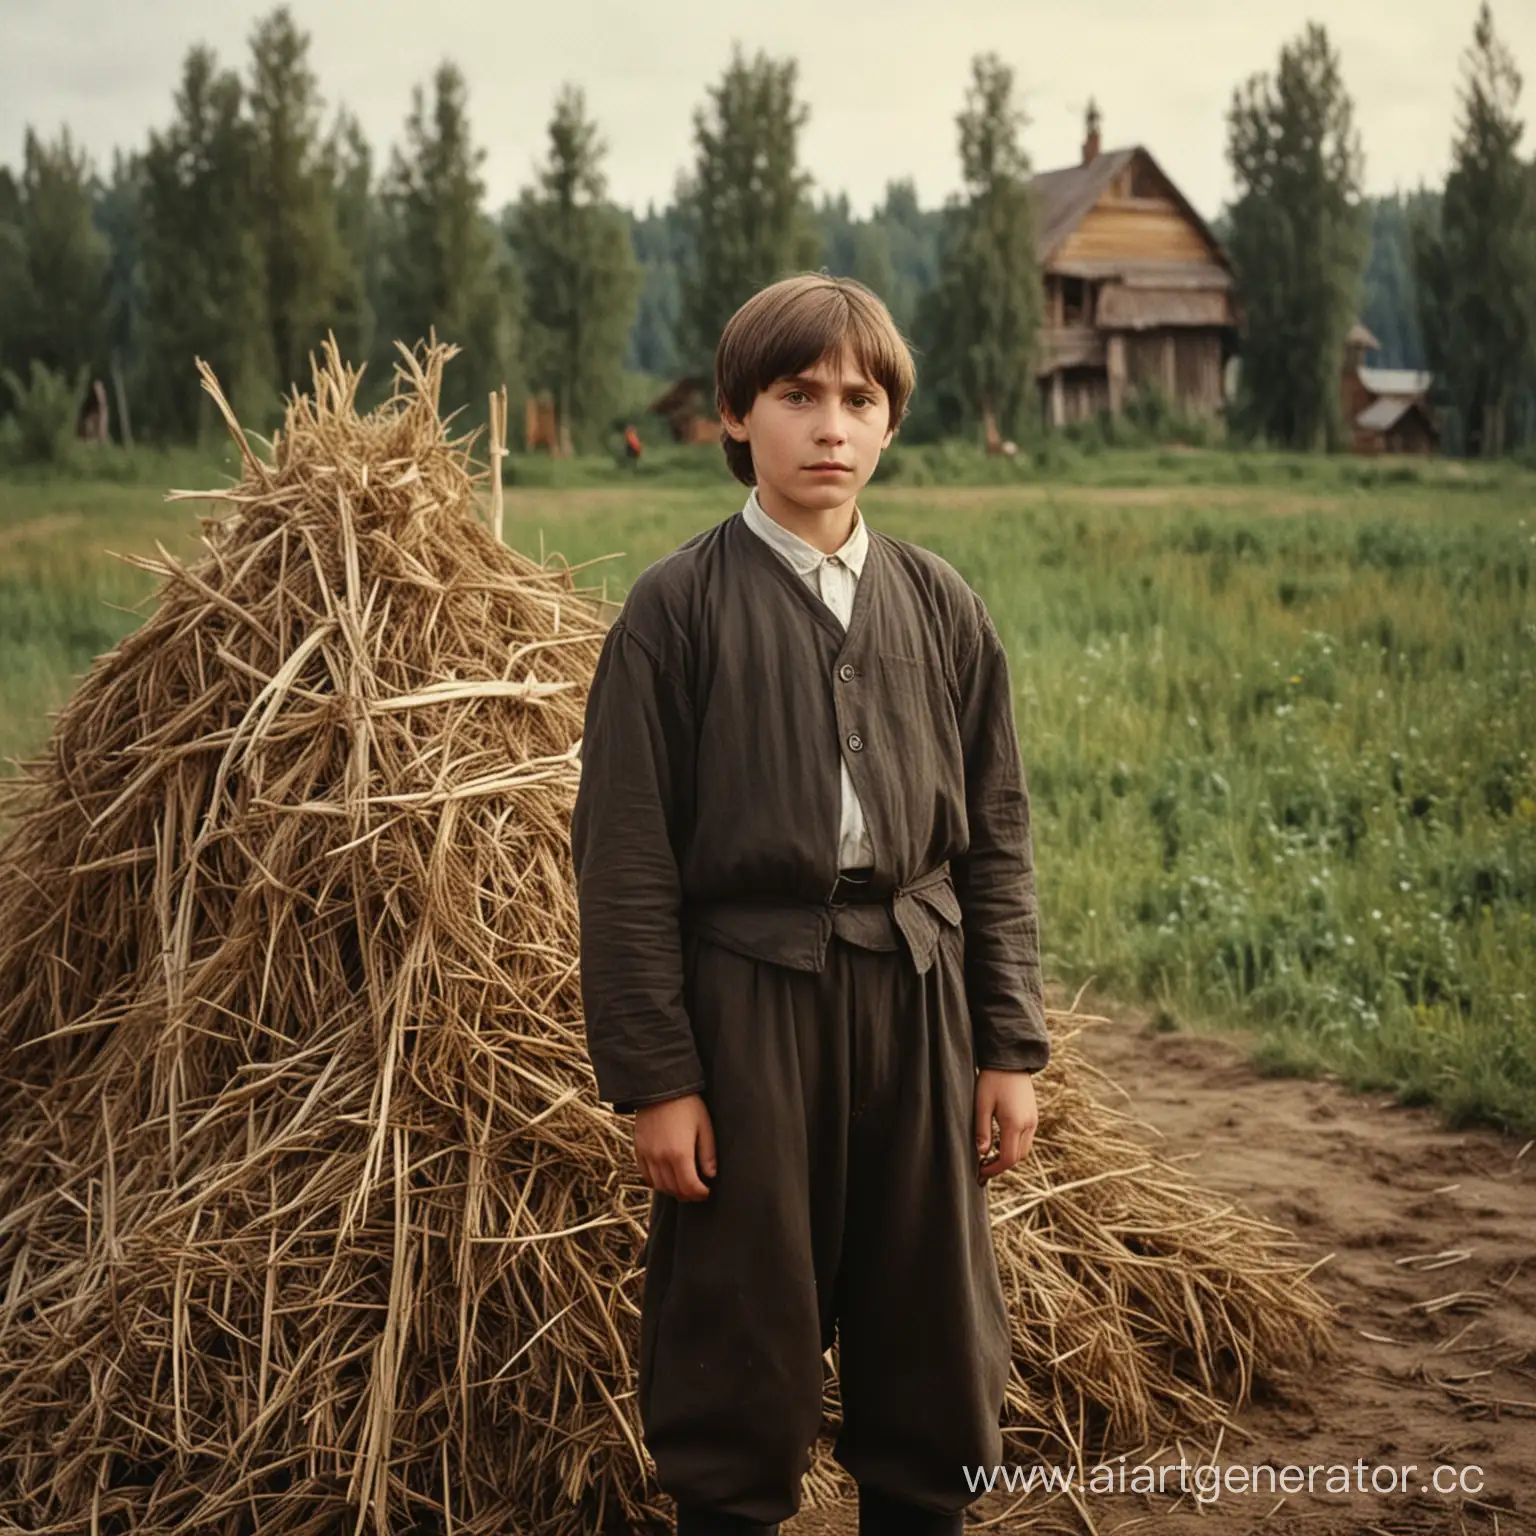 Young-Rasputin-at-Play-A-12YearOlds-Rural-Adventure-Amidst-Haystacks-and-Forests